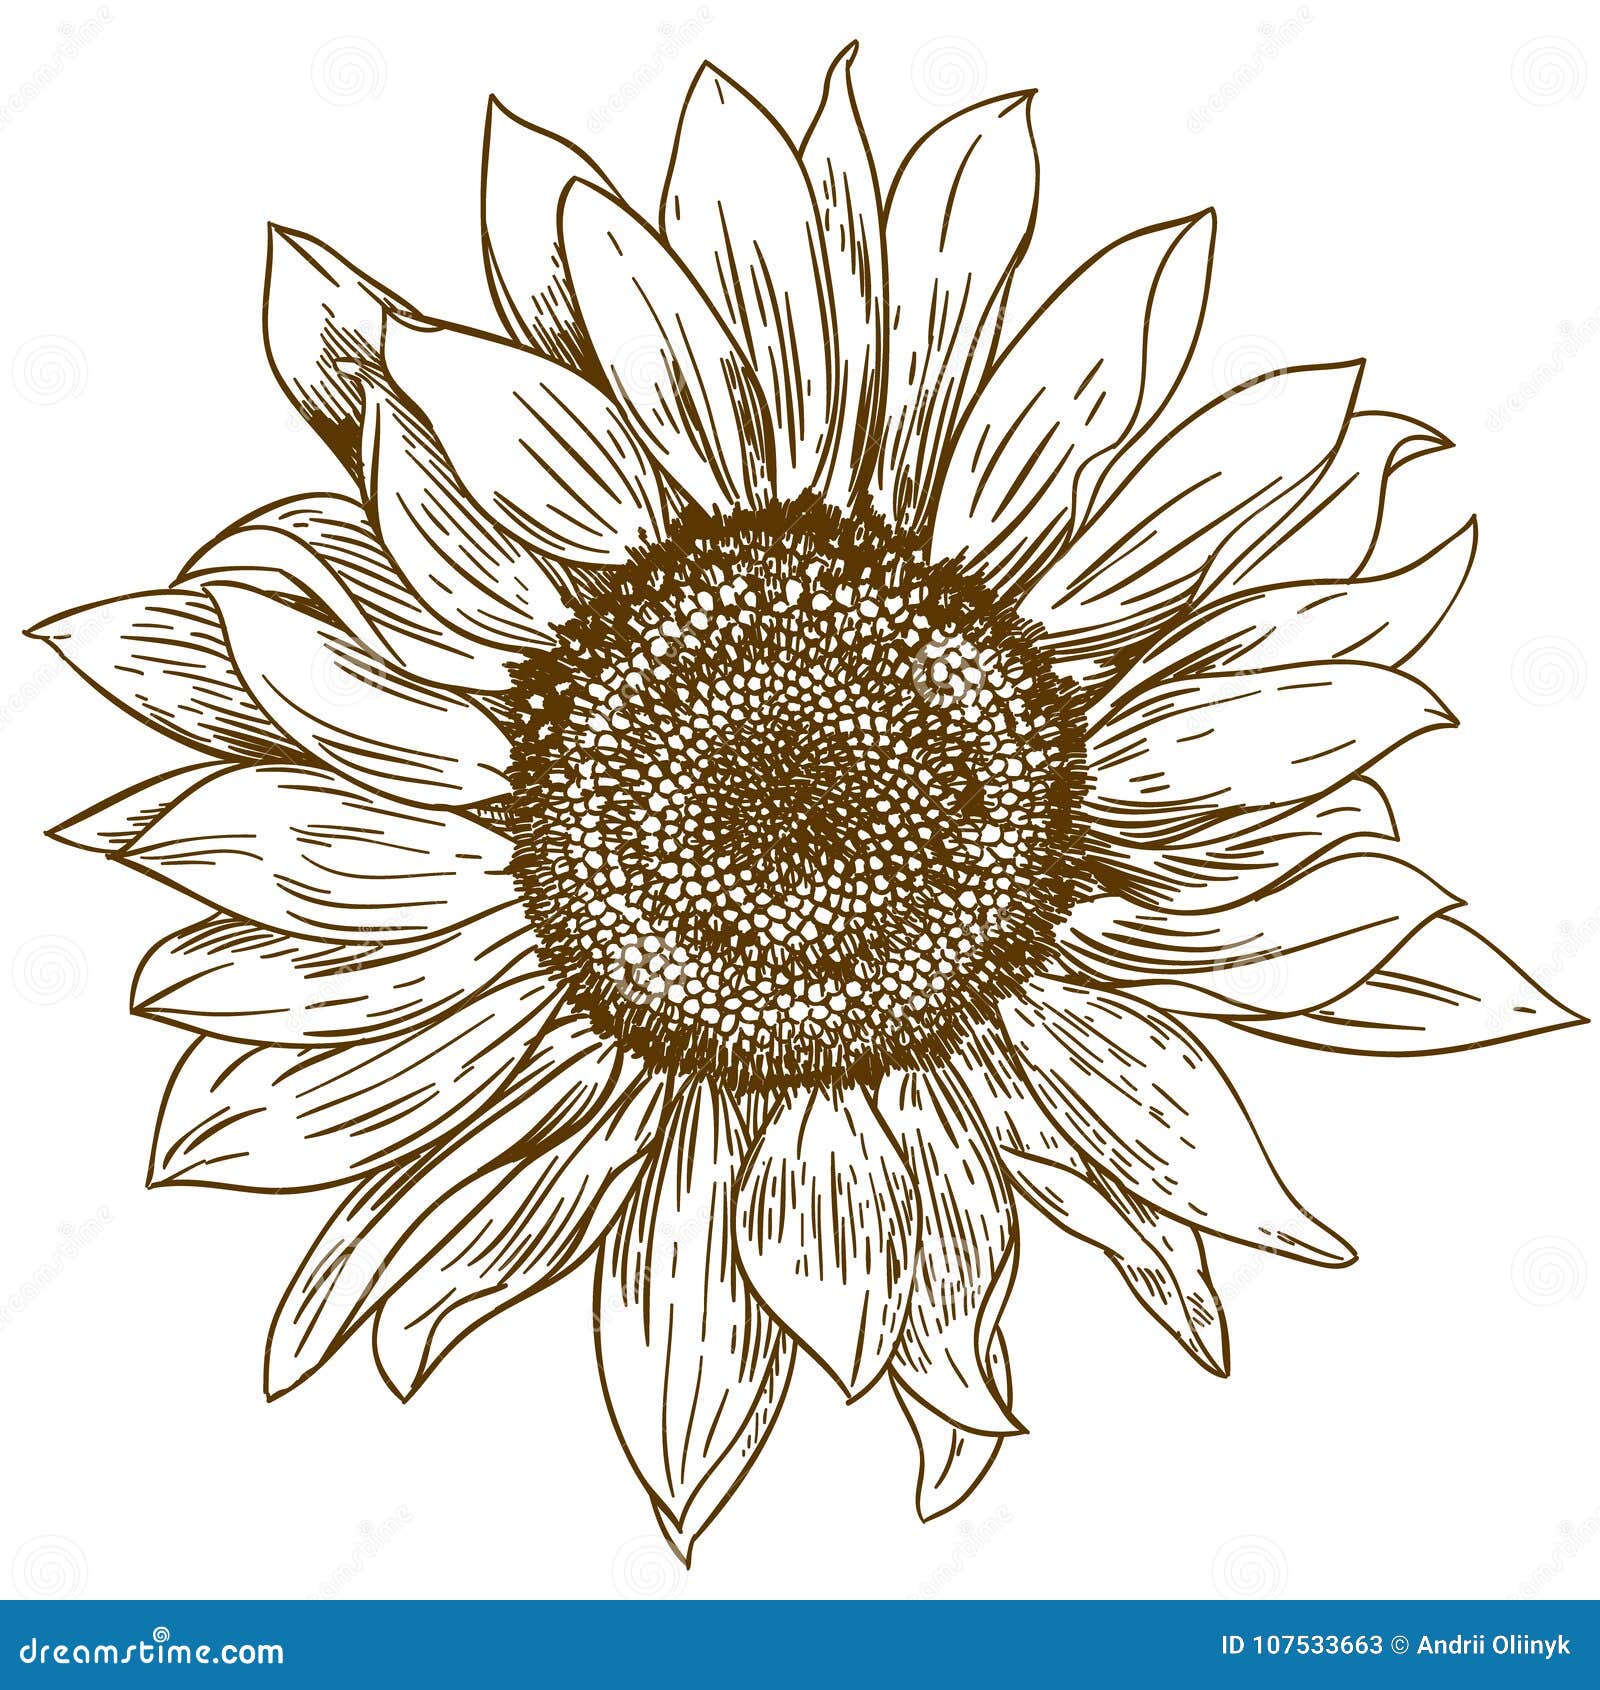 engraving drawing  of big sunflower